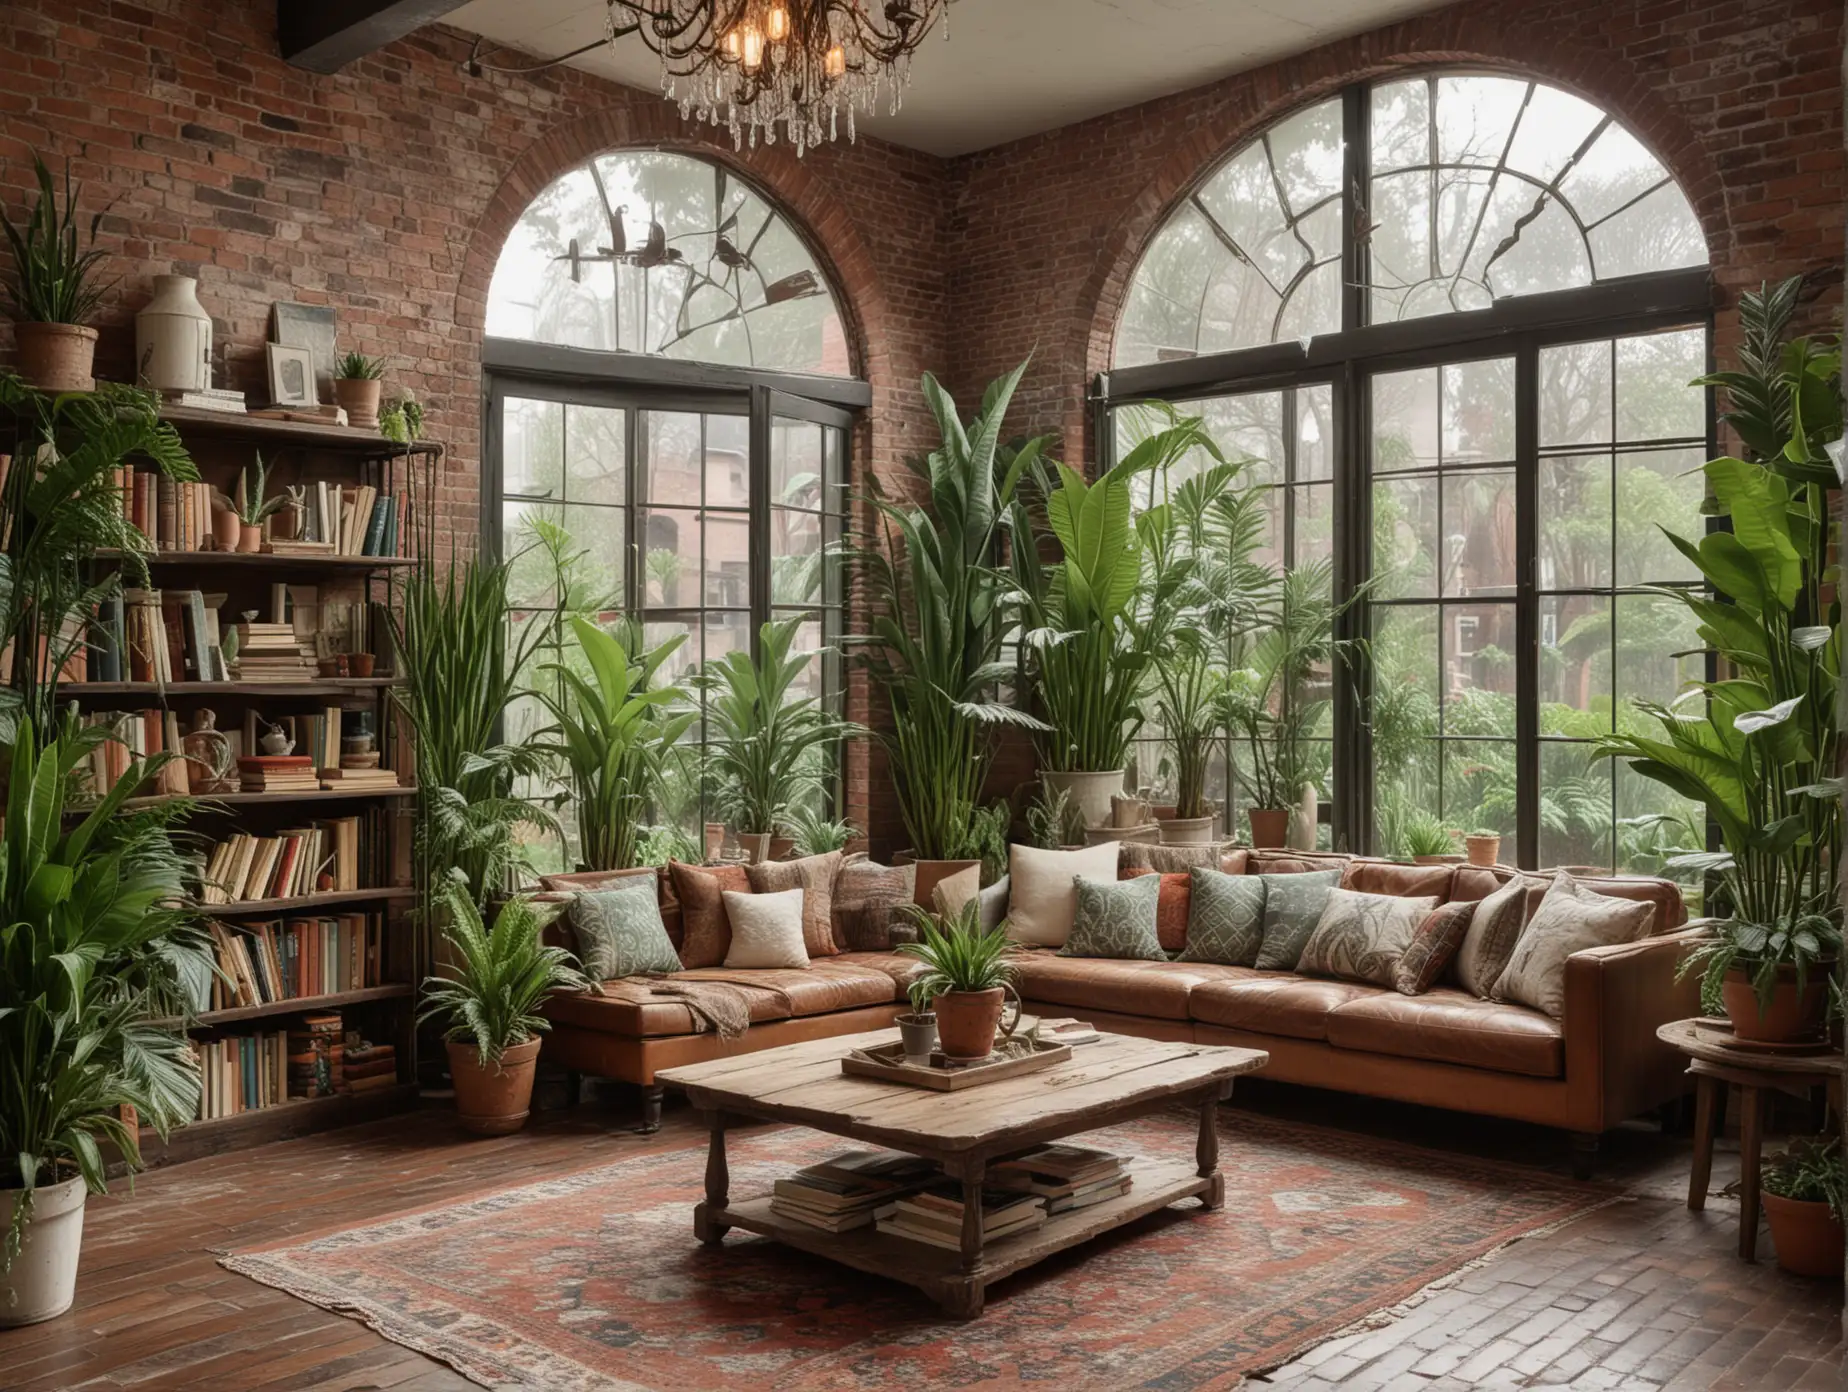 A cozy vintage lounge interior decor image,large glass windows, a rustic wooden coffee table, a bookshelf filled with old books, and indoor plants like snake plants and ferns in ceramic pots. The wide shot highlights exposed brick walls with weathered paint, large windows overlooking a rainy garden, and a patterned rug anchoring the seating area. A vintage chandelier adds an elegant touch.